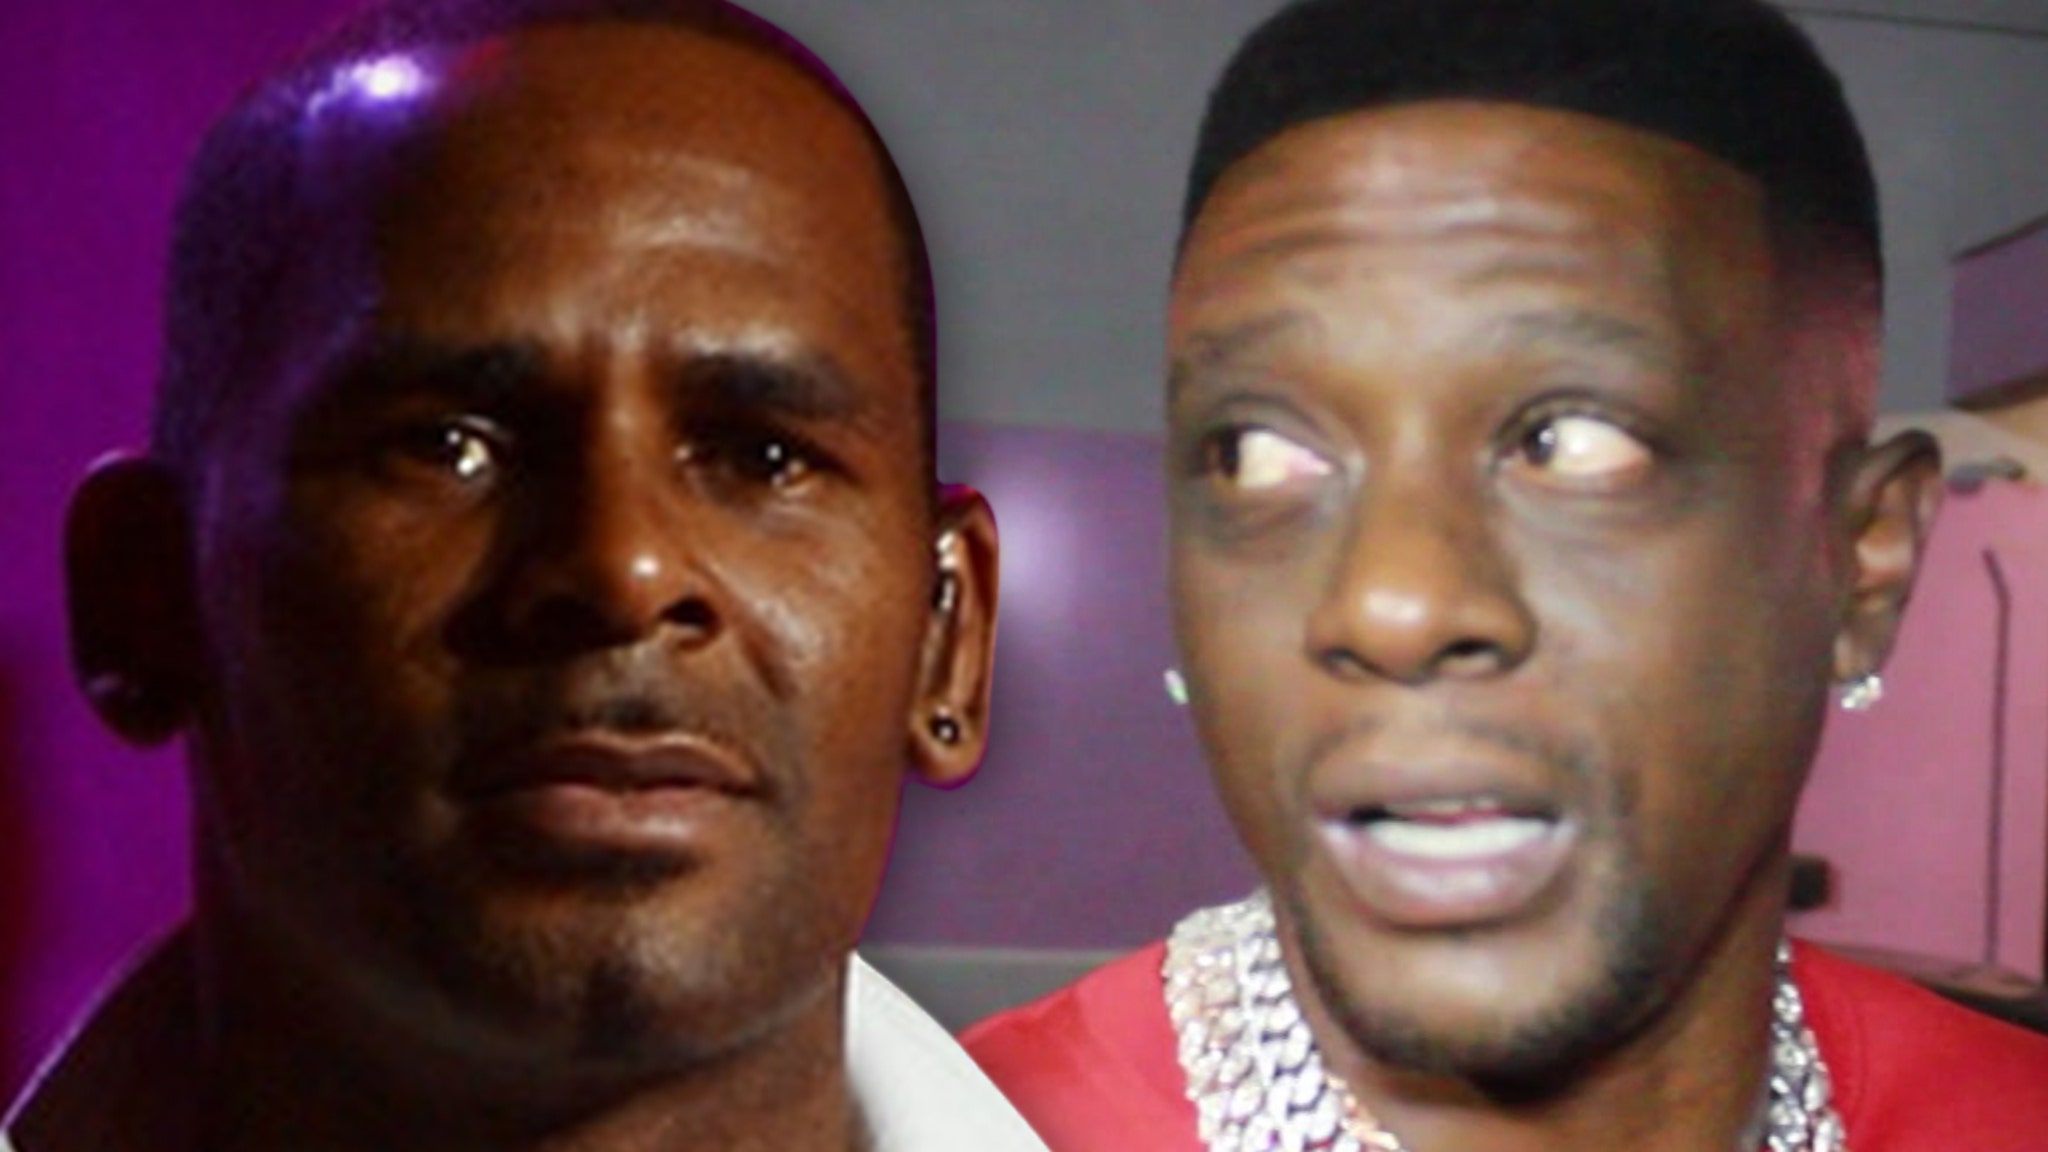 Boosie Badazz Loses it Over R. Kelly's Sentence, '30 Years? F*** No!!!'